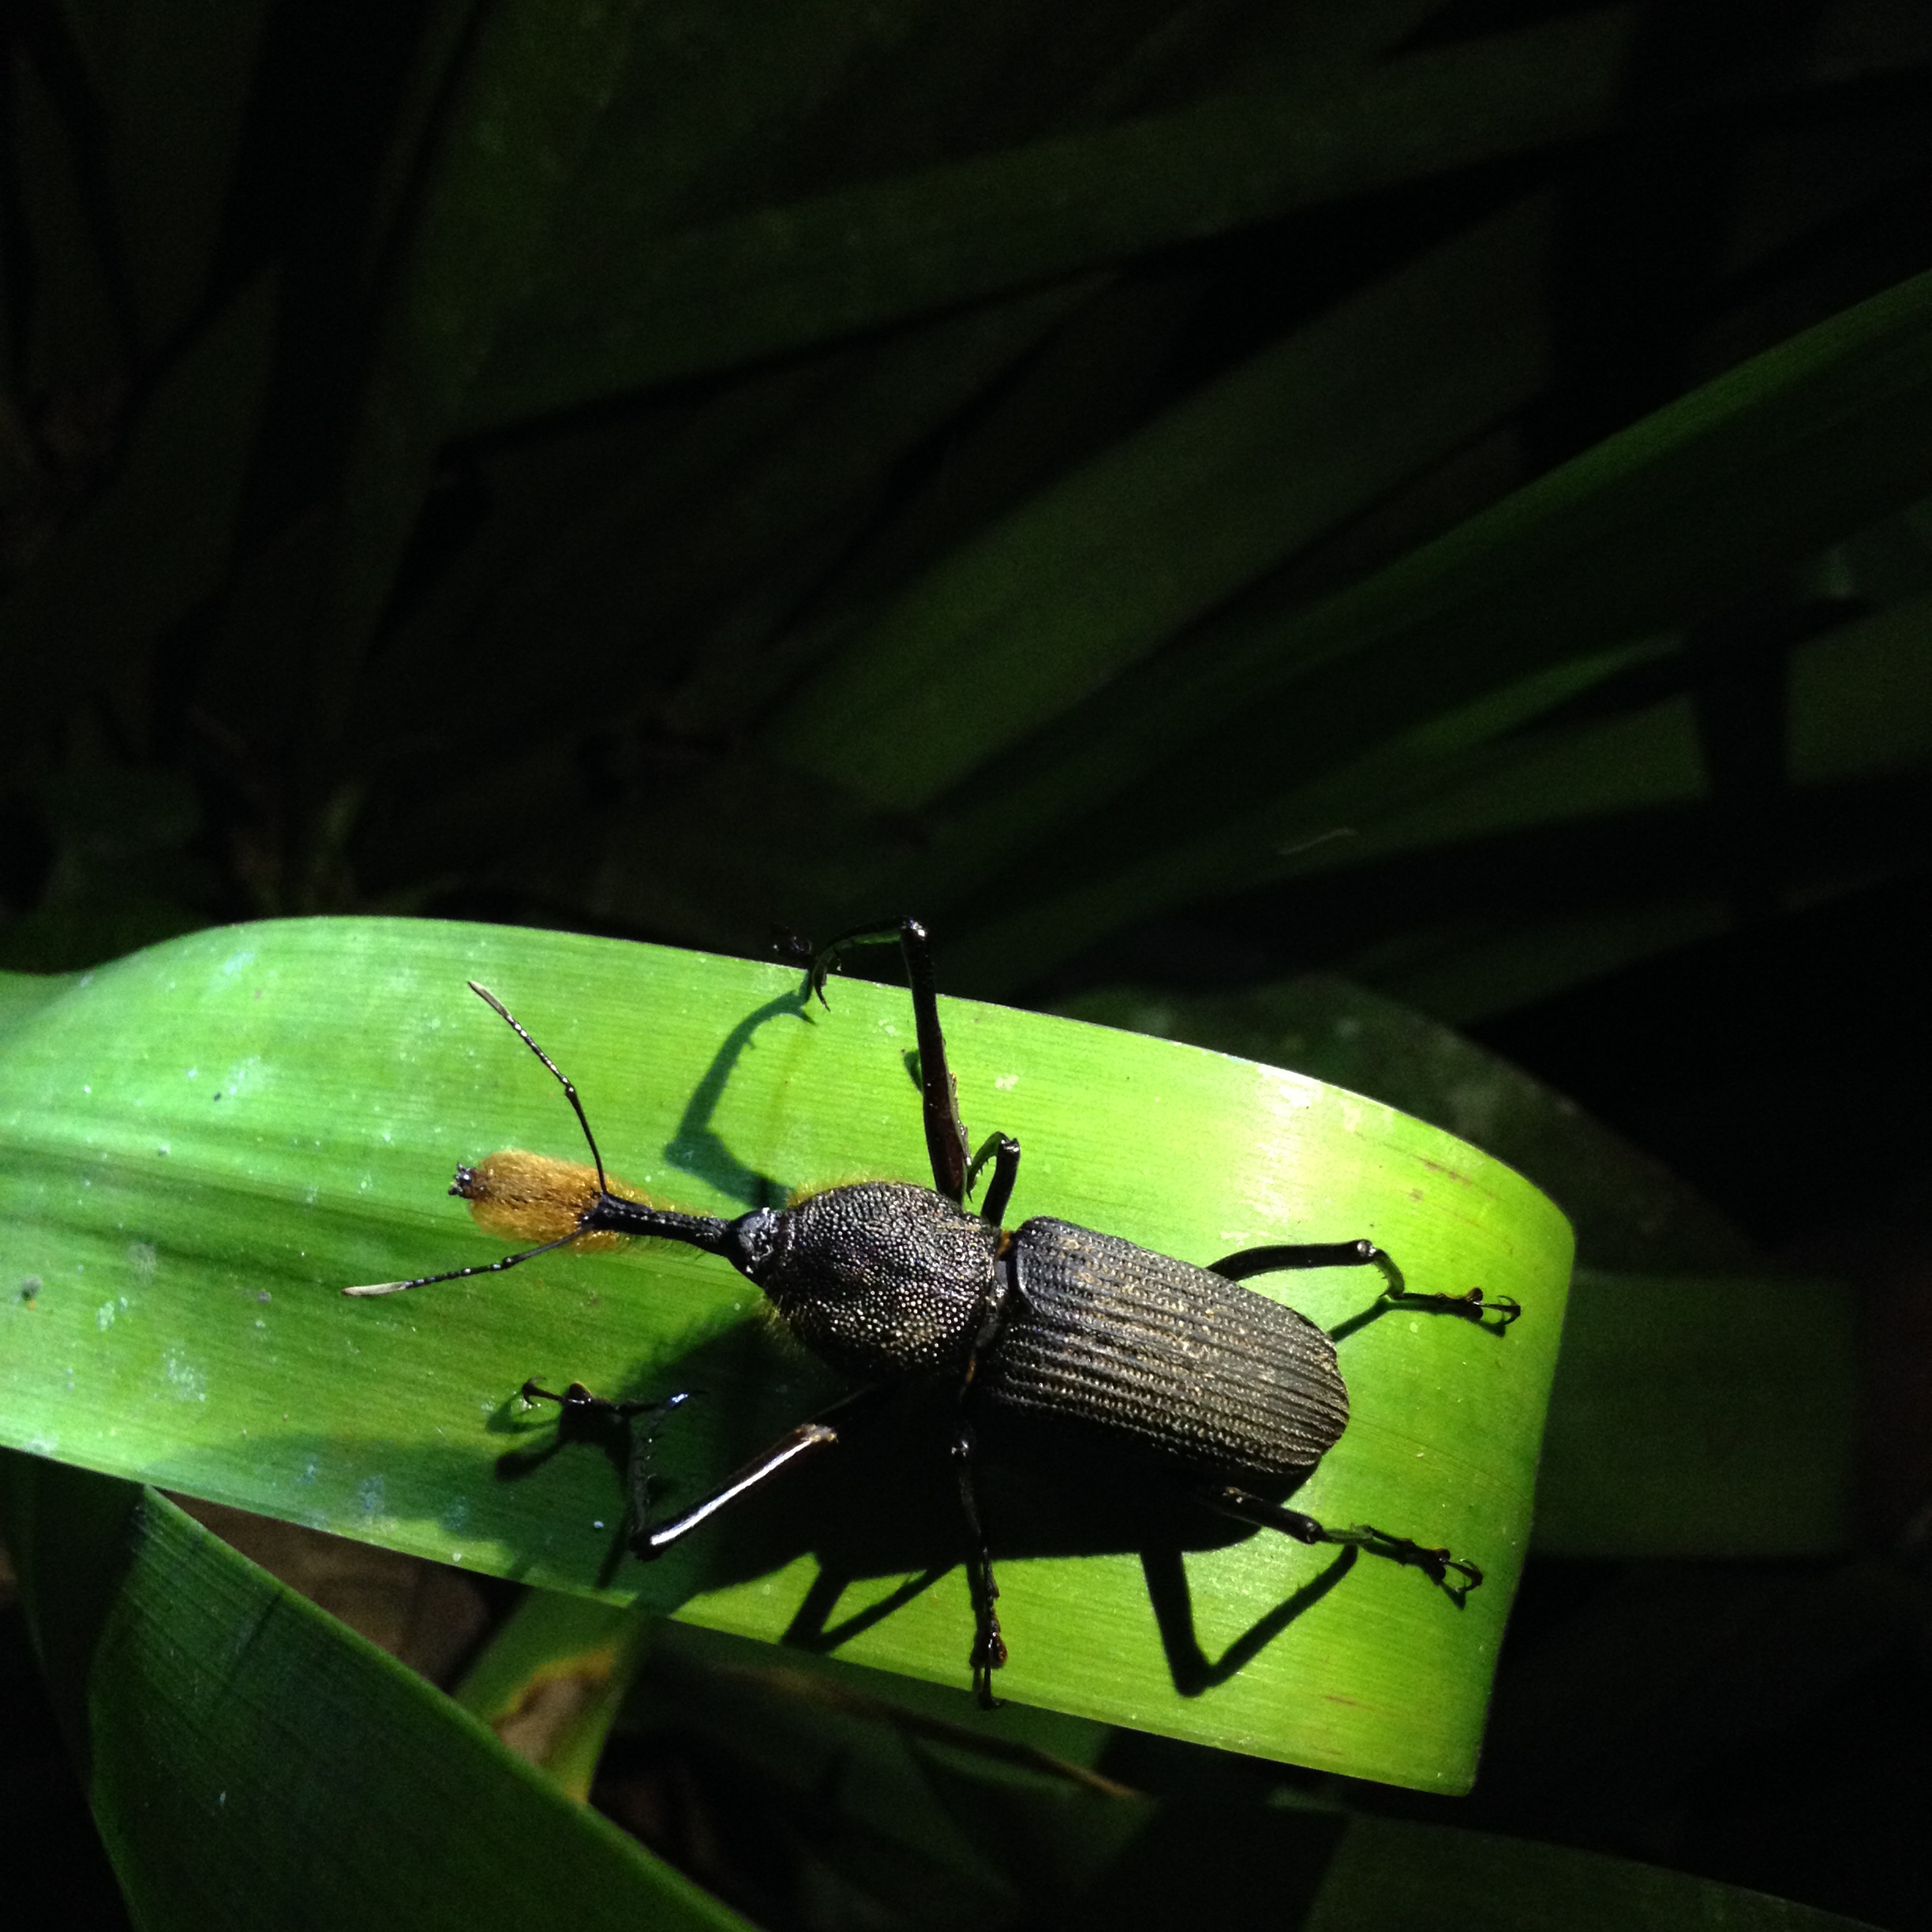 INTAD Student Photographs Insect in Costa Rica